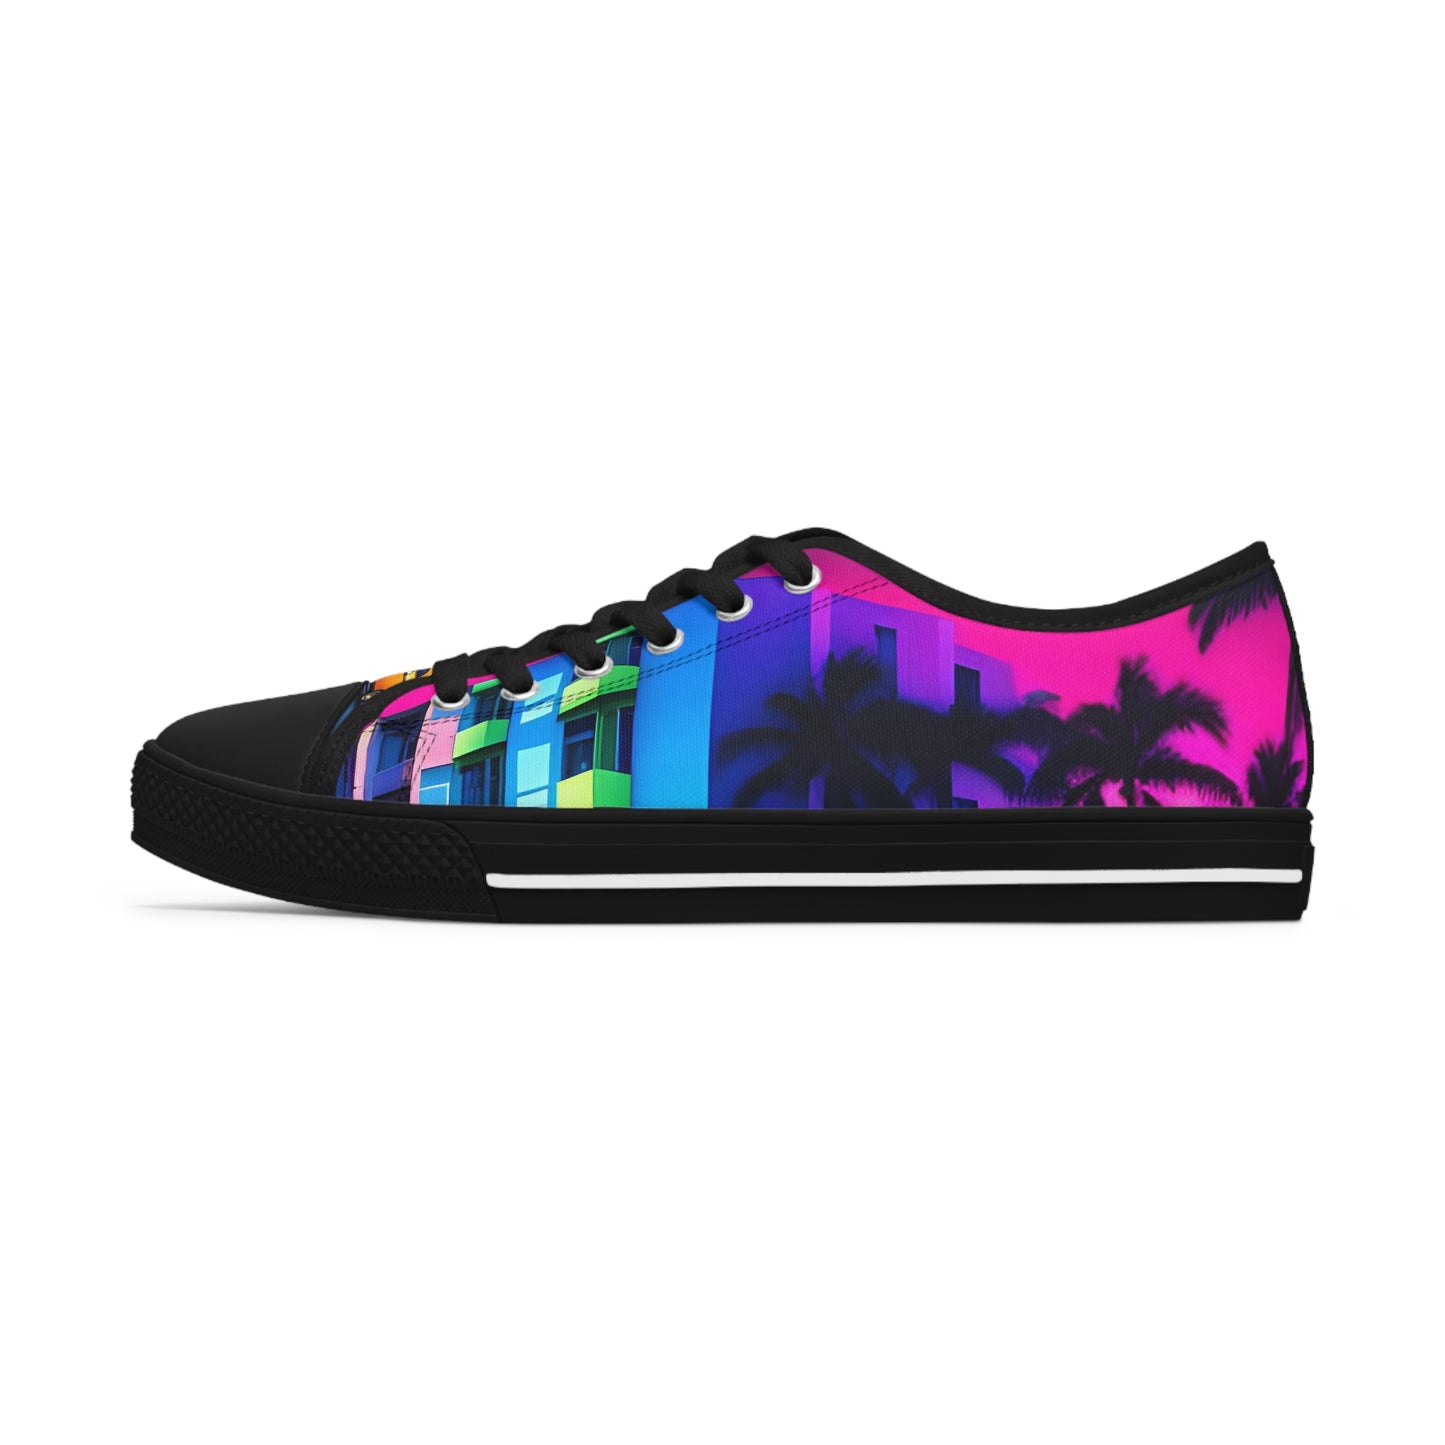 Miami Nights Women's Low Top Sneakers (limited edition)